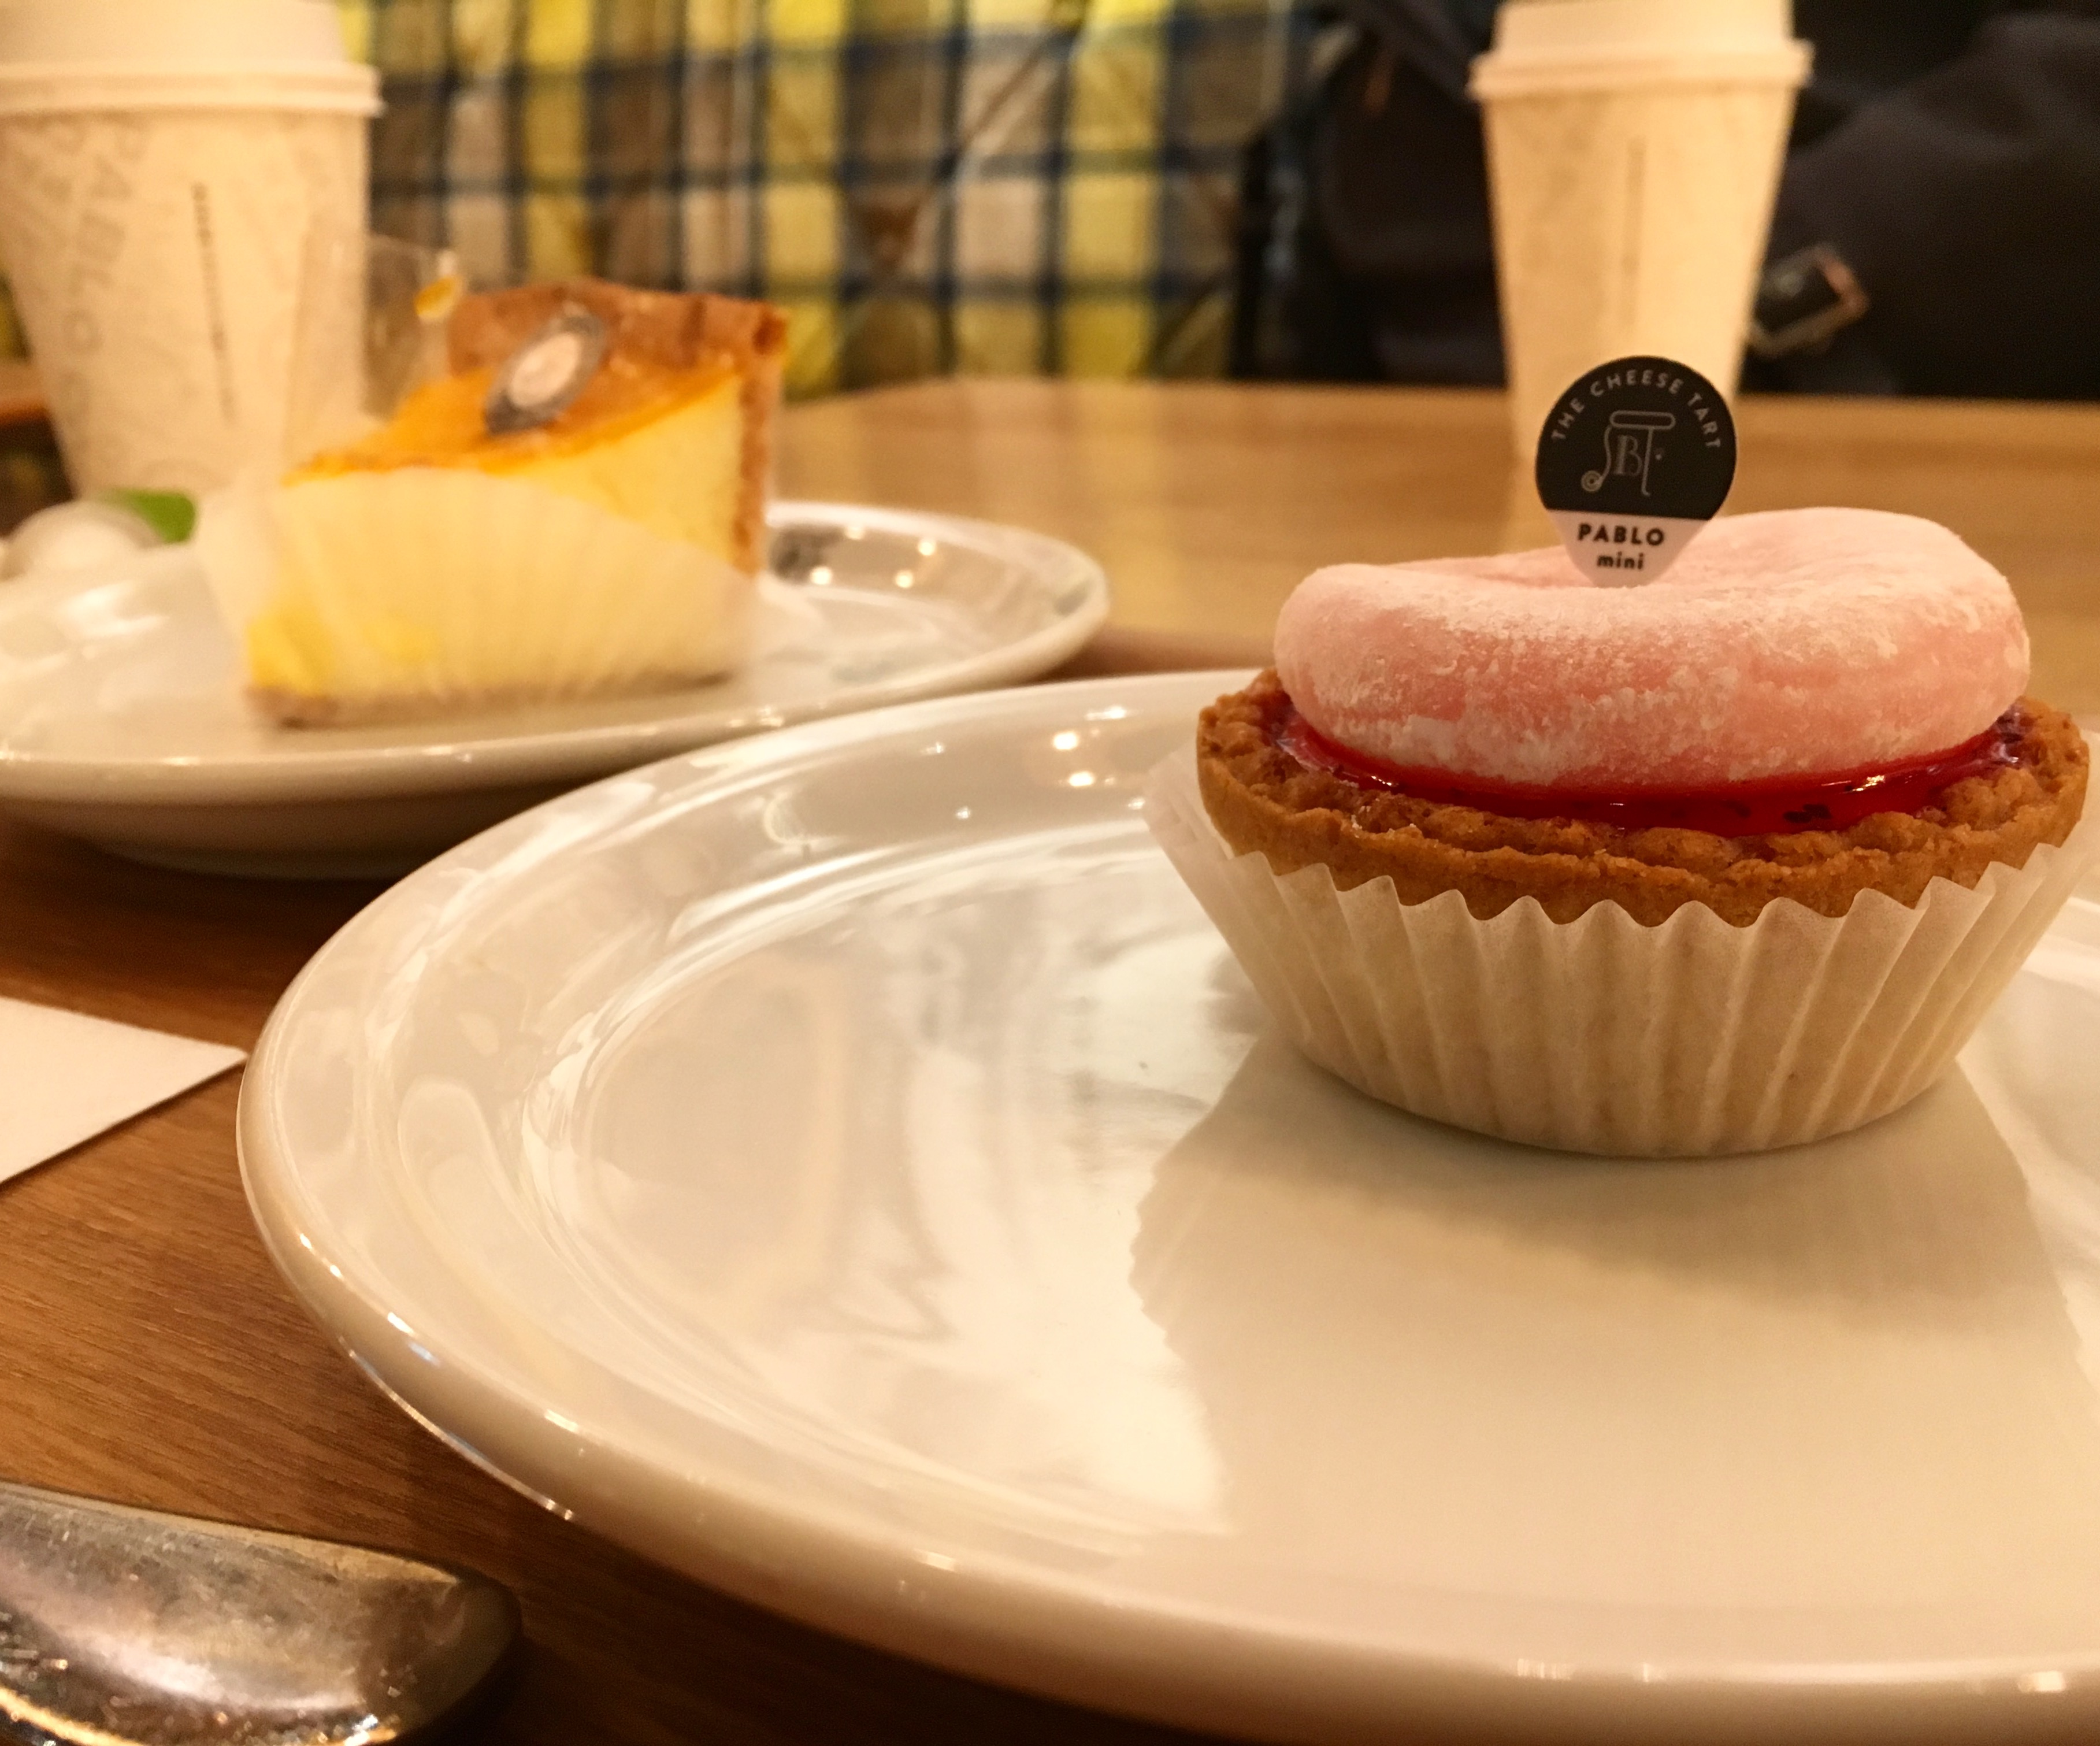 assortment of cheesecakes in a warmly lit Pablo cheesecake cafe